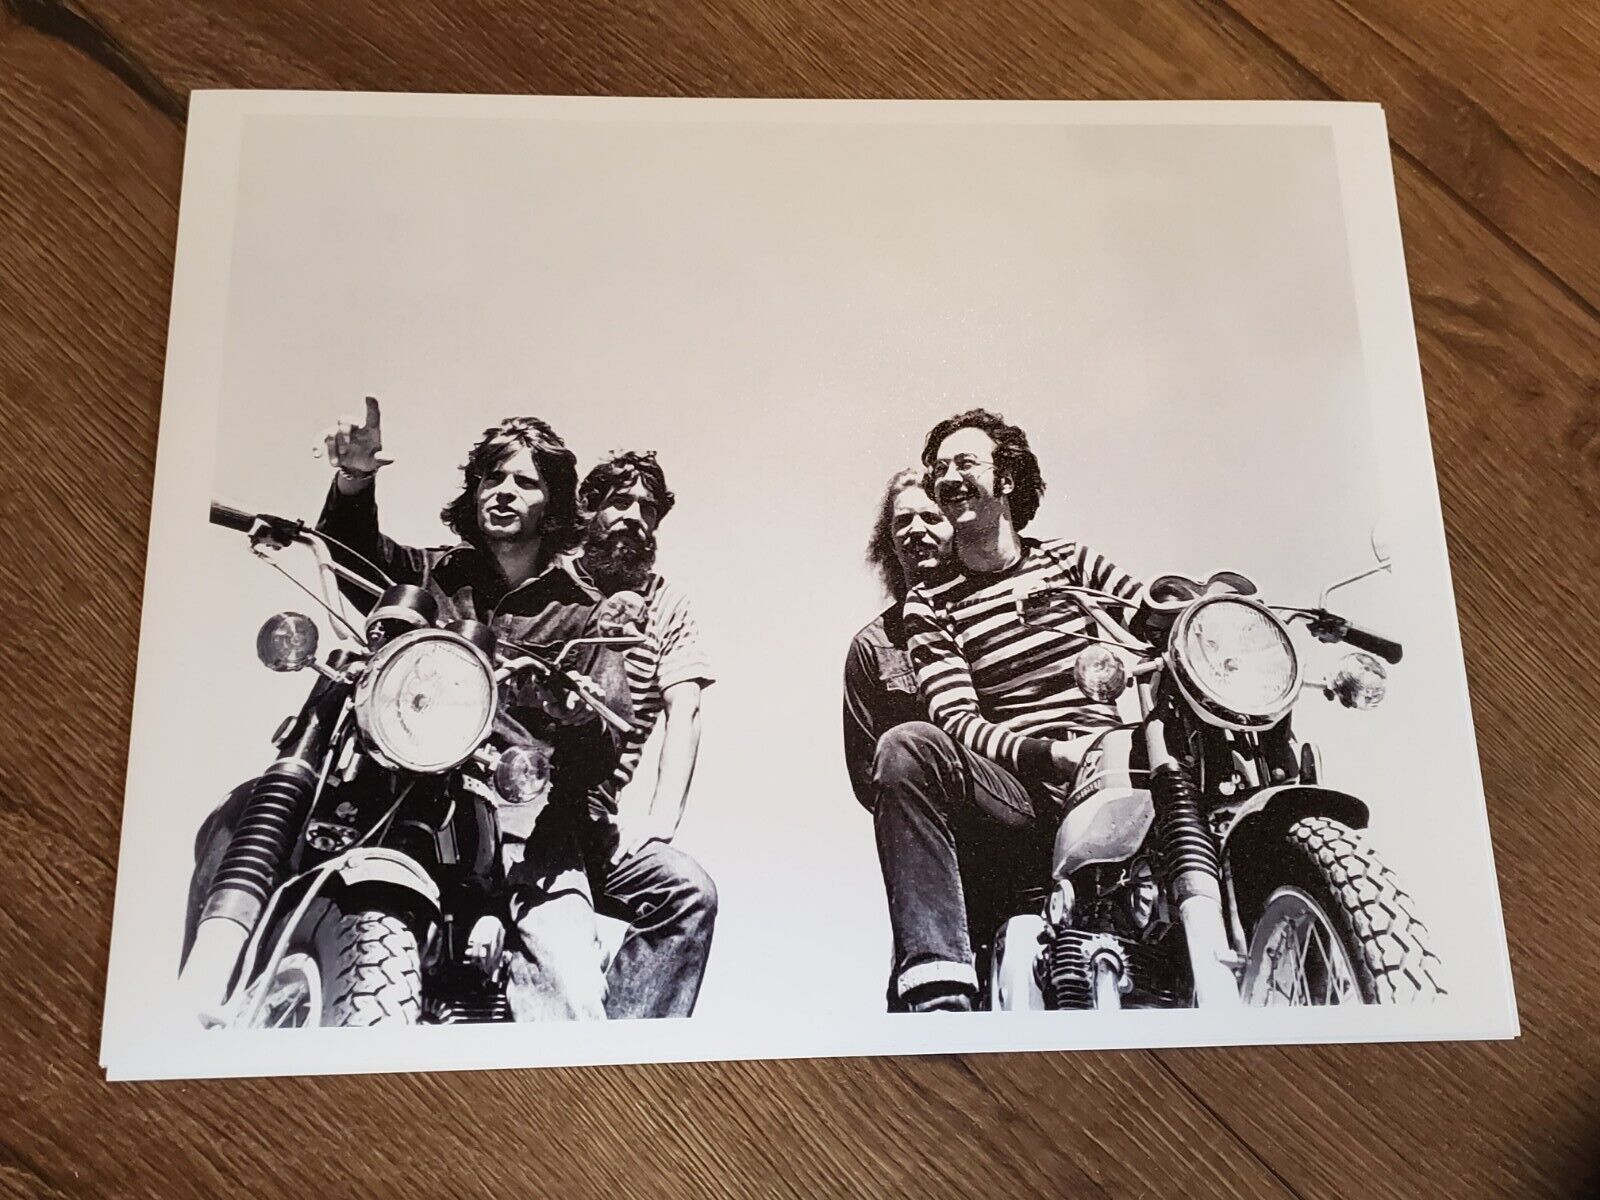 CREDENCE CLEARWATER REVIVAL Art Print Photo 11x14 Poster JOHN FOGERTY Motorcycle